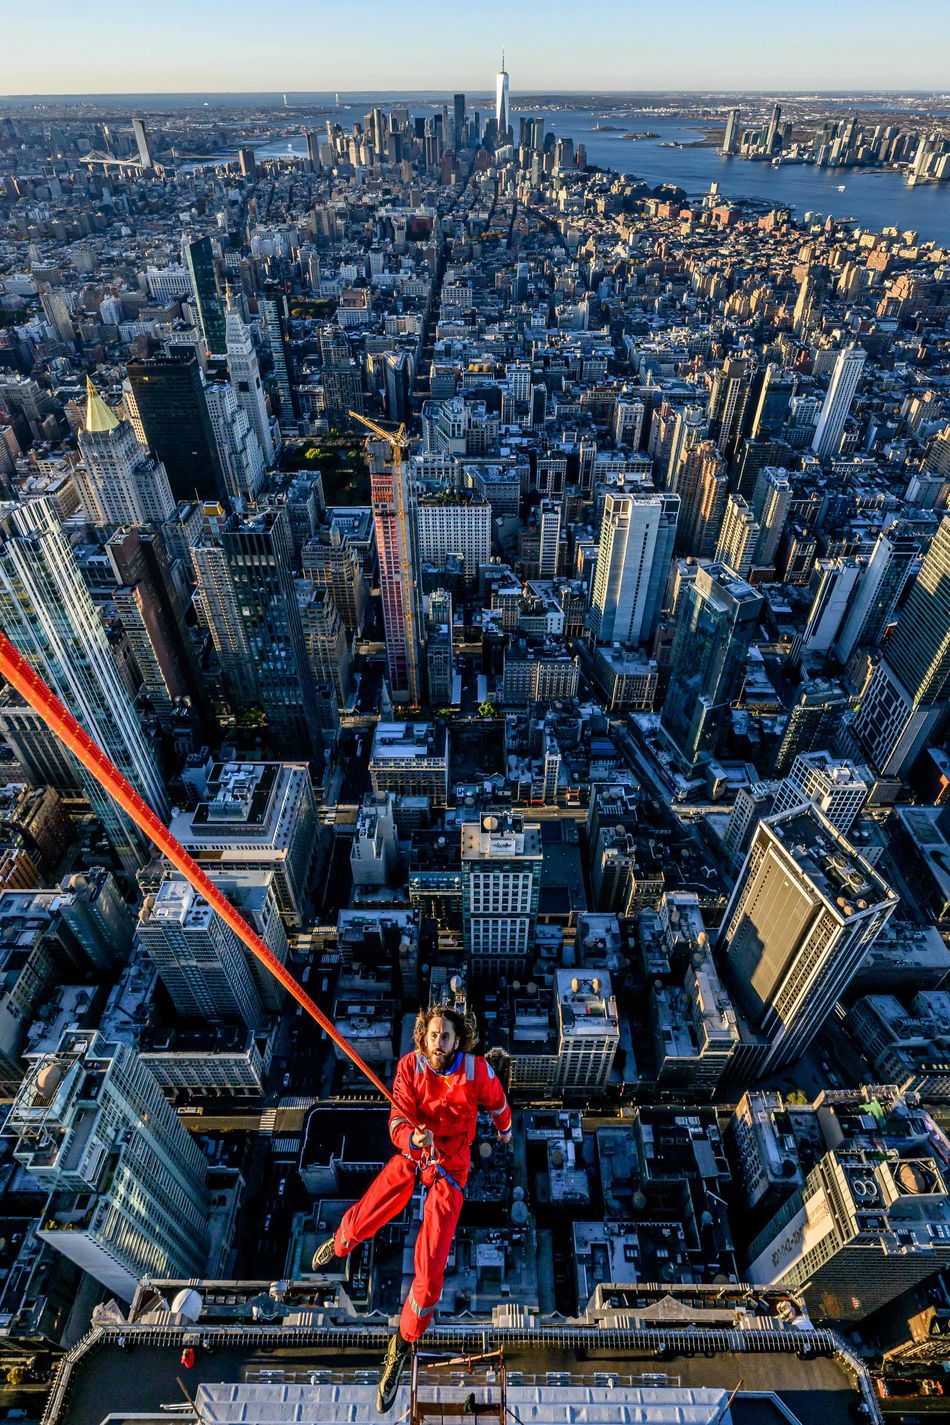 Jared Leto is the first person to climb the Empire State Building